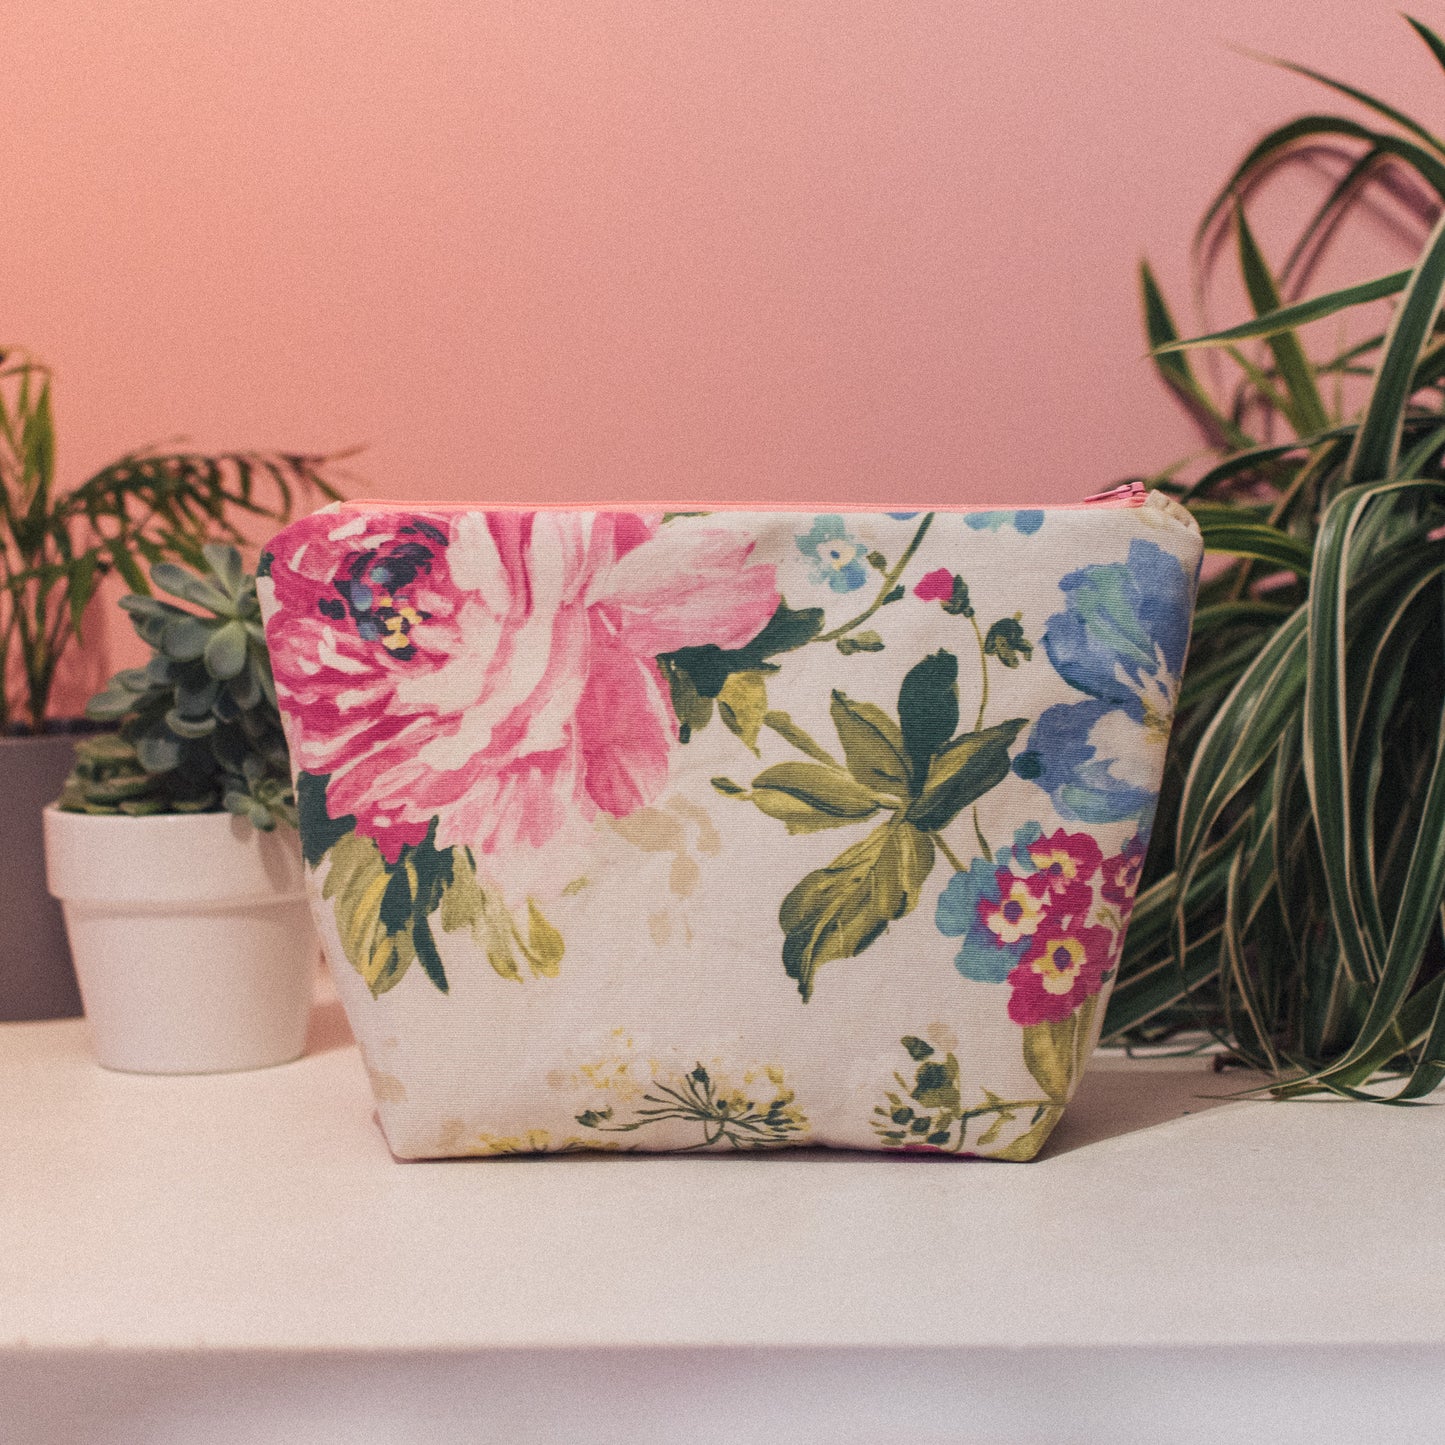 Floral Wash Bag with Large Pink, Blue and Cream Floral Pattern